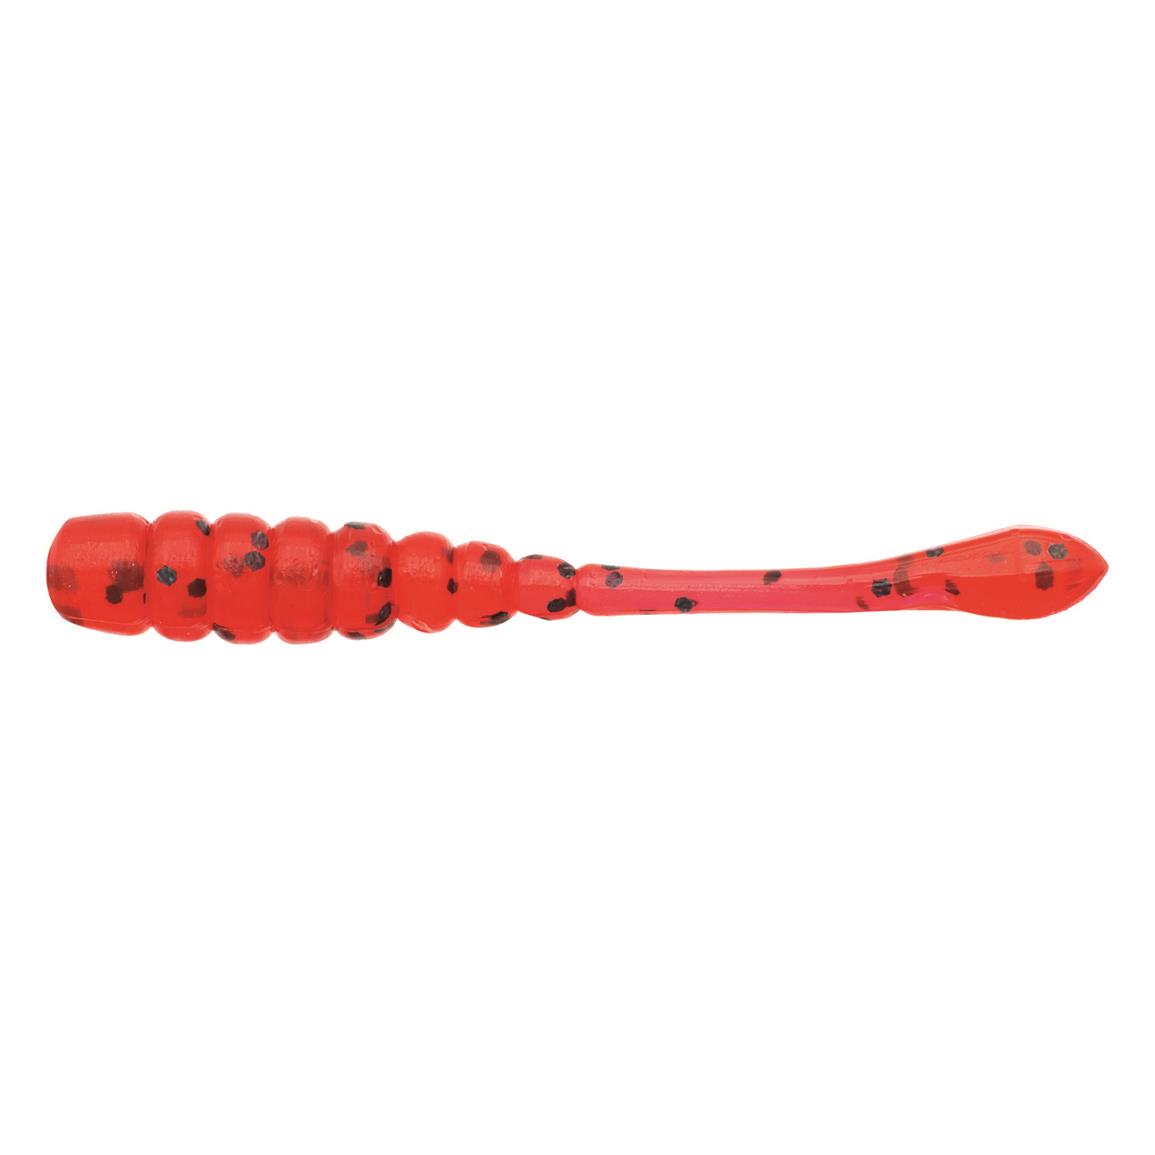 Eurotackle FNM Minnow 1.5", 9 Pack, Red